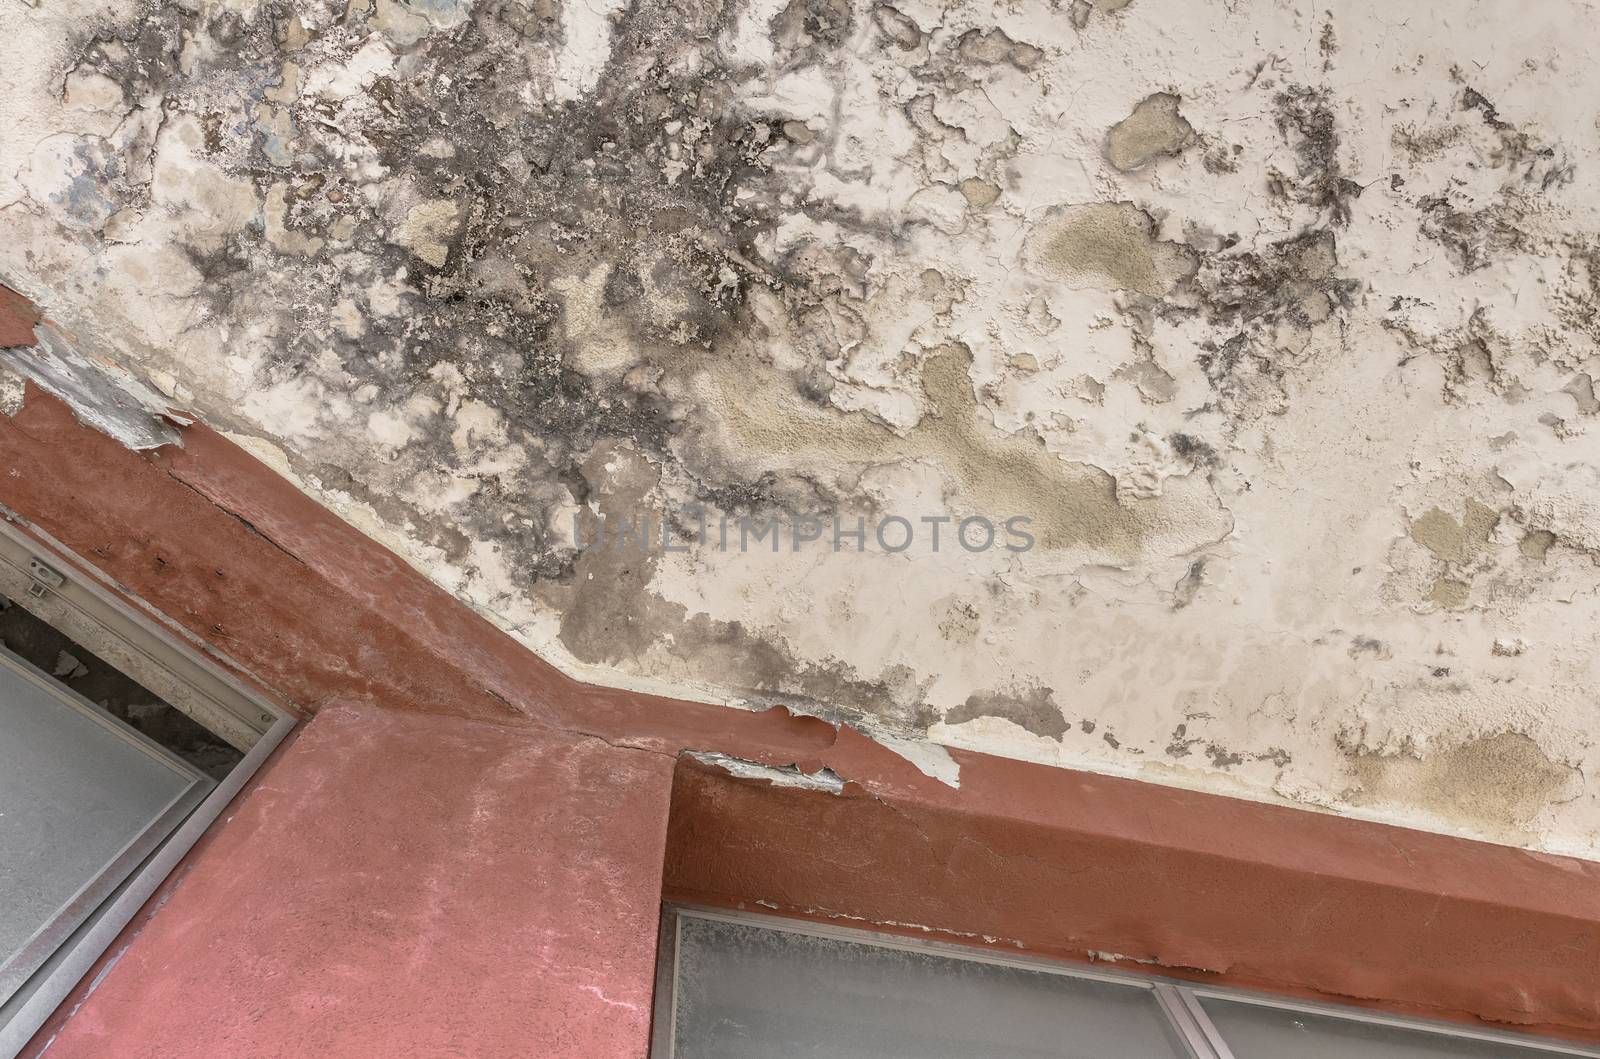 Black Mold growth and stains on the ceiling by germanopoli